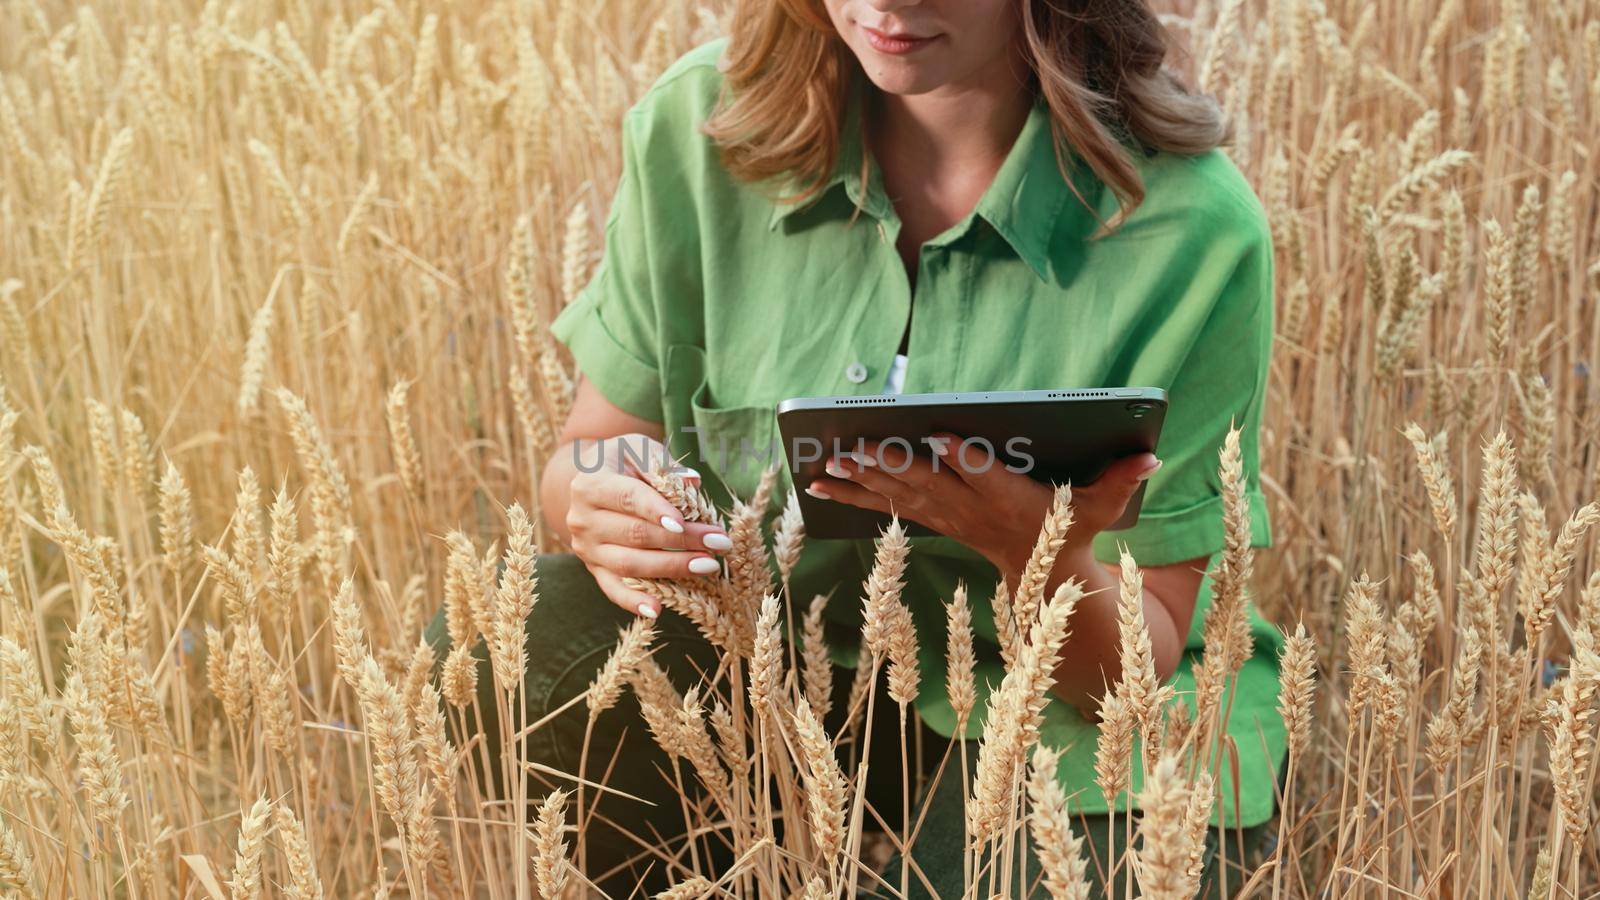 Woman agronomist works in ripe wheat field with digital tablet, checking integrity of ears, growth. Agricultural business, technology, smart eco system, harvest concept. by kristina_kokhanova